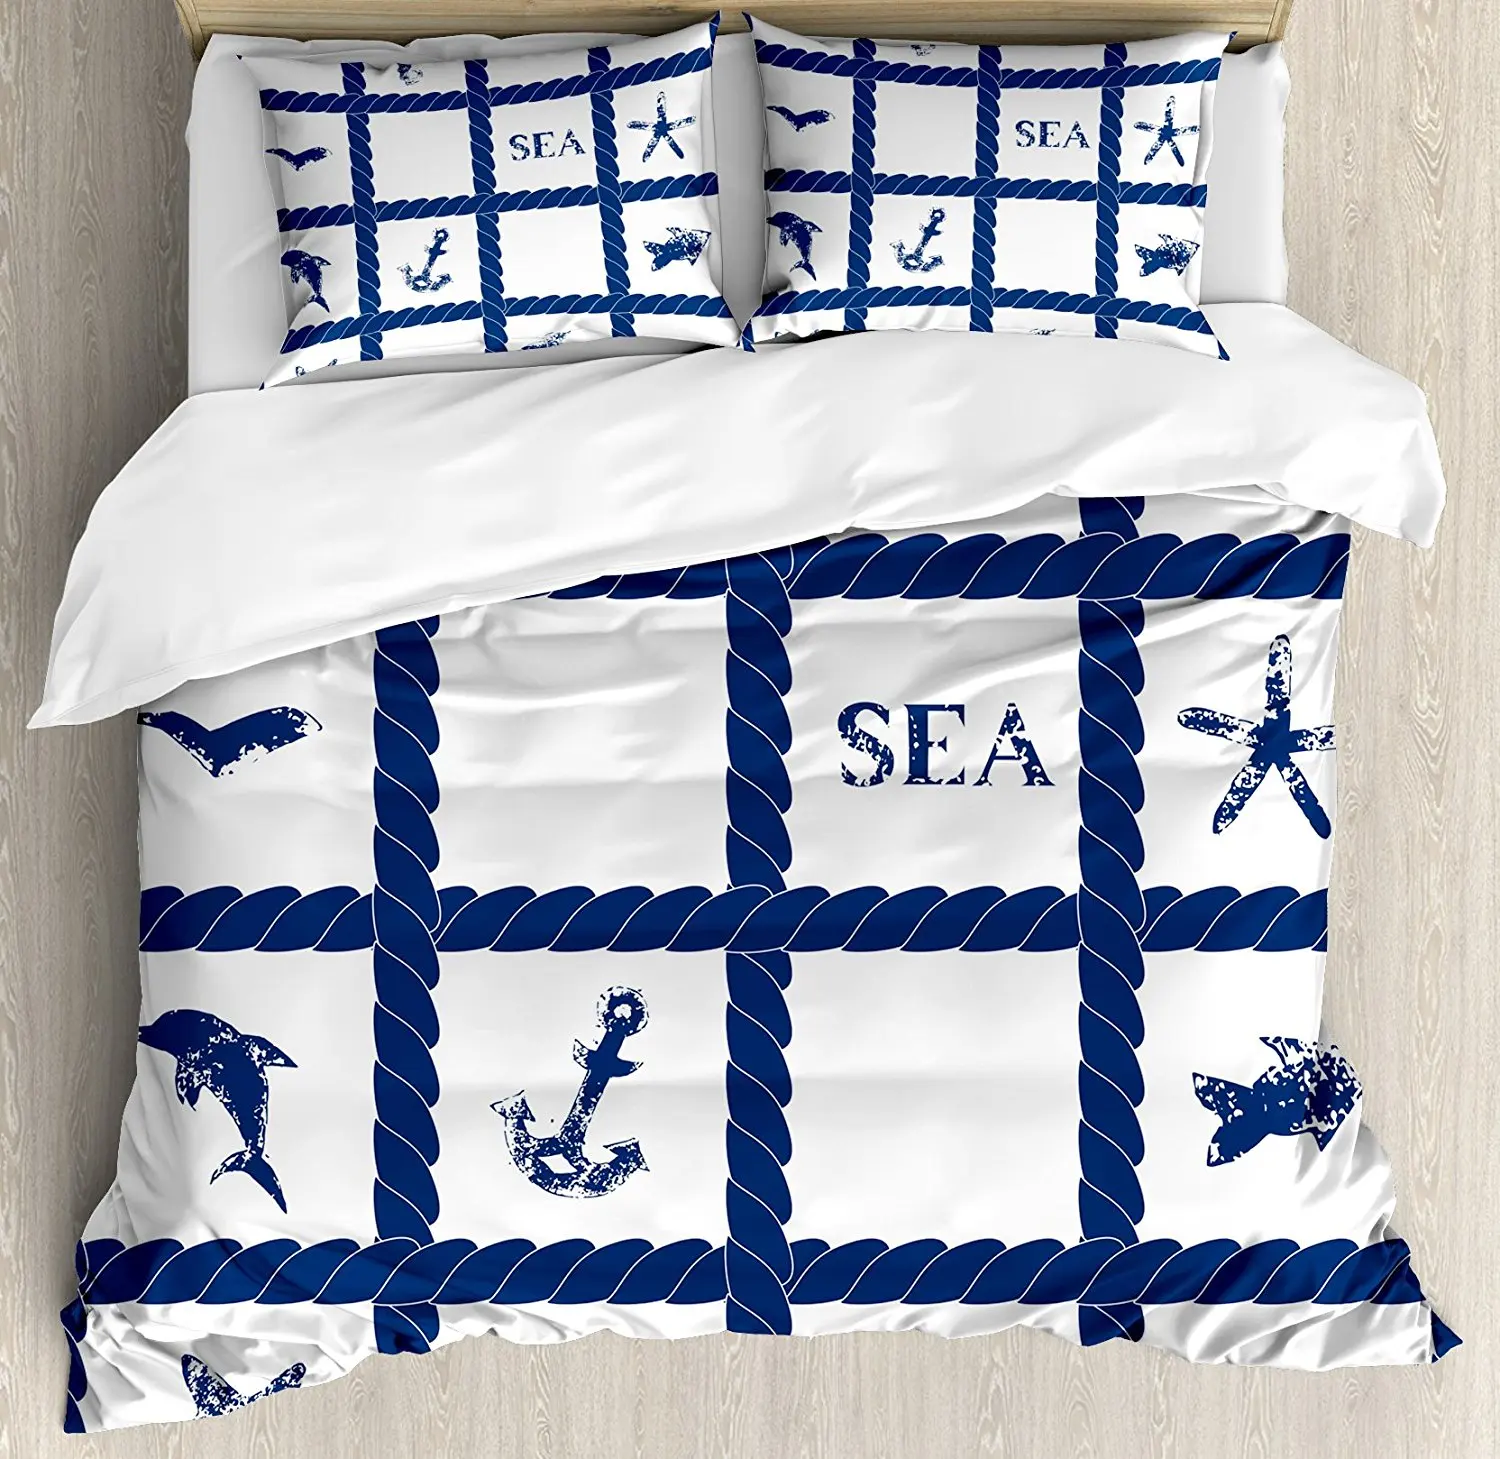 Navy Blue Duvet Cover Set Navy Yacht Vessel Rope Used As Frame